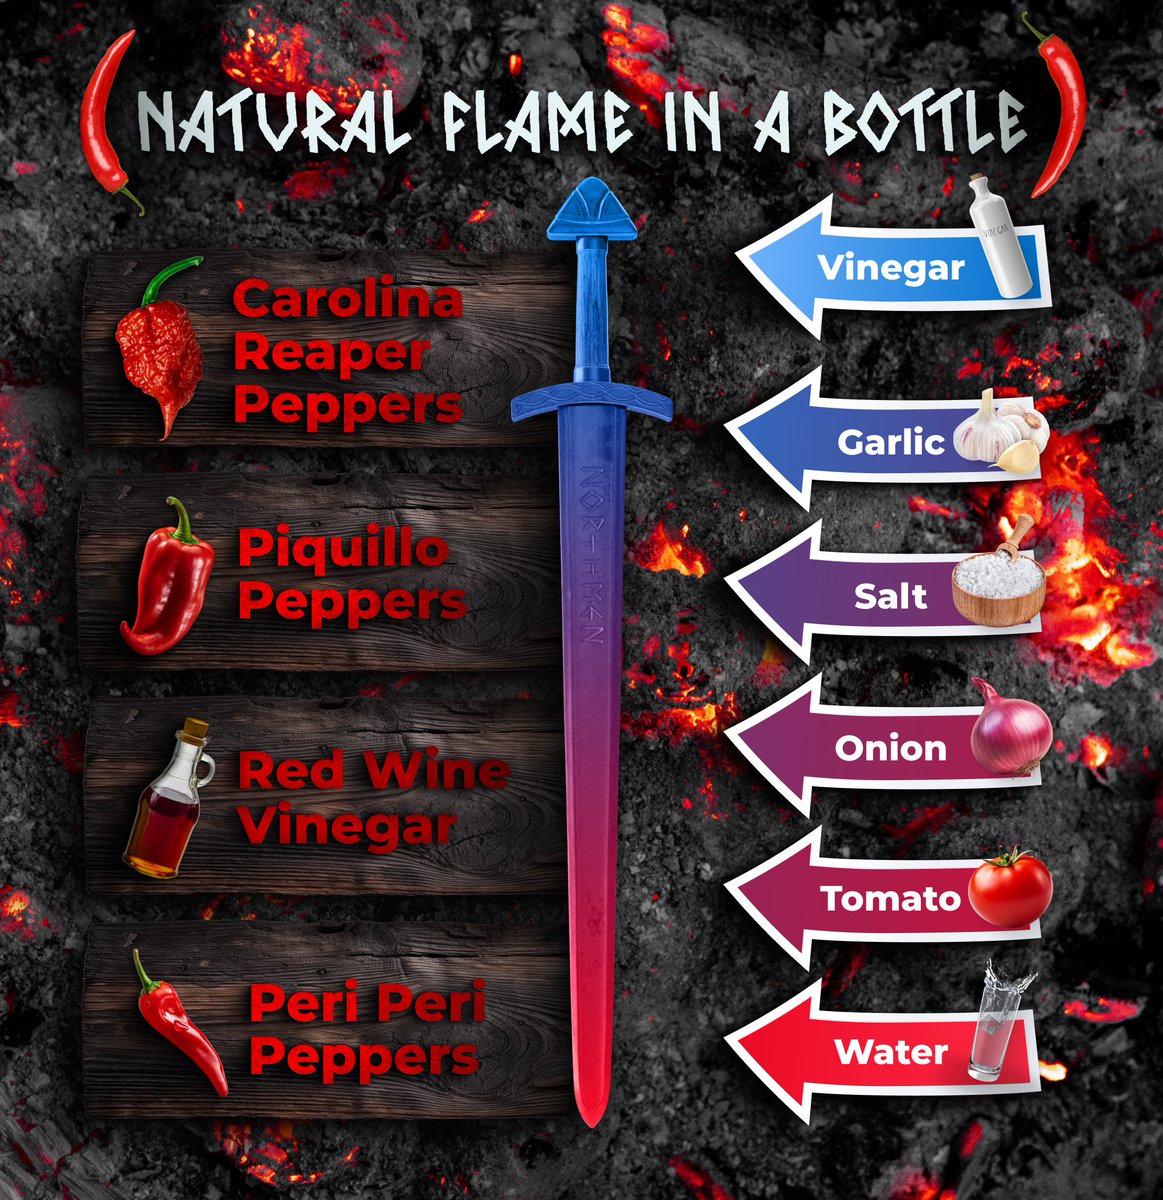 Our fiery elixir blends the intensity of Caroline Reaper, the allure of Piquillo, and the zing of Peri Peri peppers, all mixed with salt, onion, garlic, and tomato. 🔥🌶🥵

ragnarokhotsauce.com

#RagnarokHotSauce #FlavorfulJourney #NaturalFlames #EveryDropCounts #FieryElixir